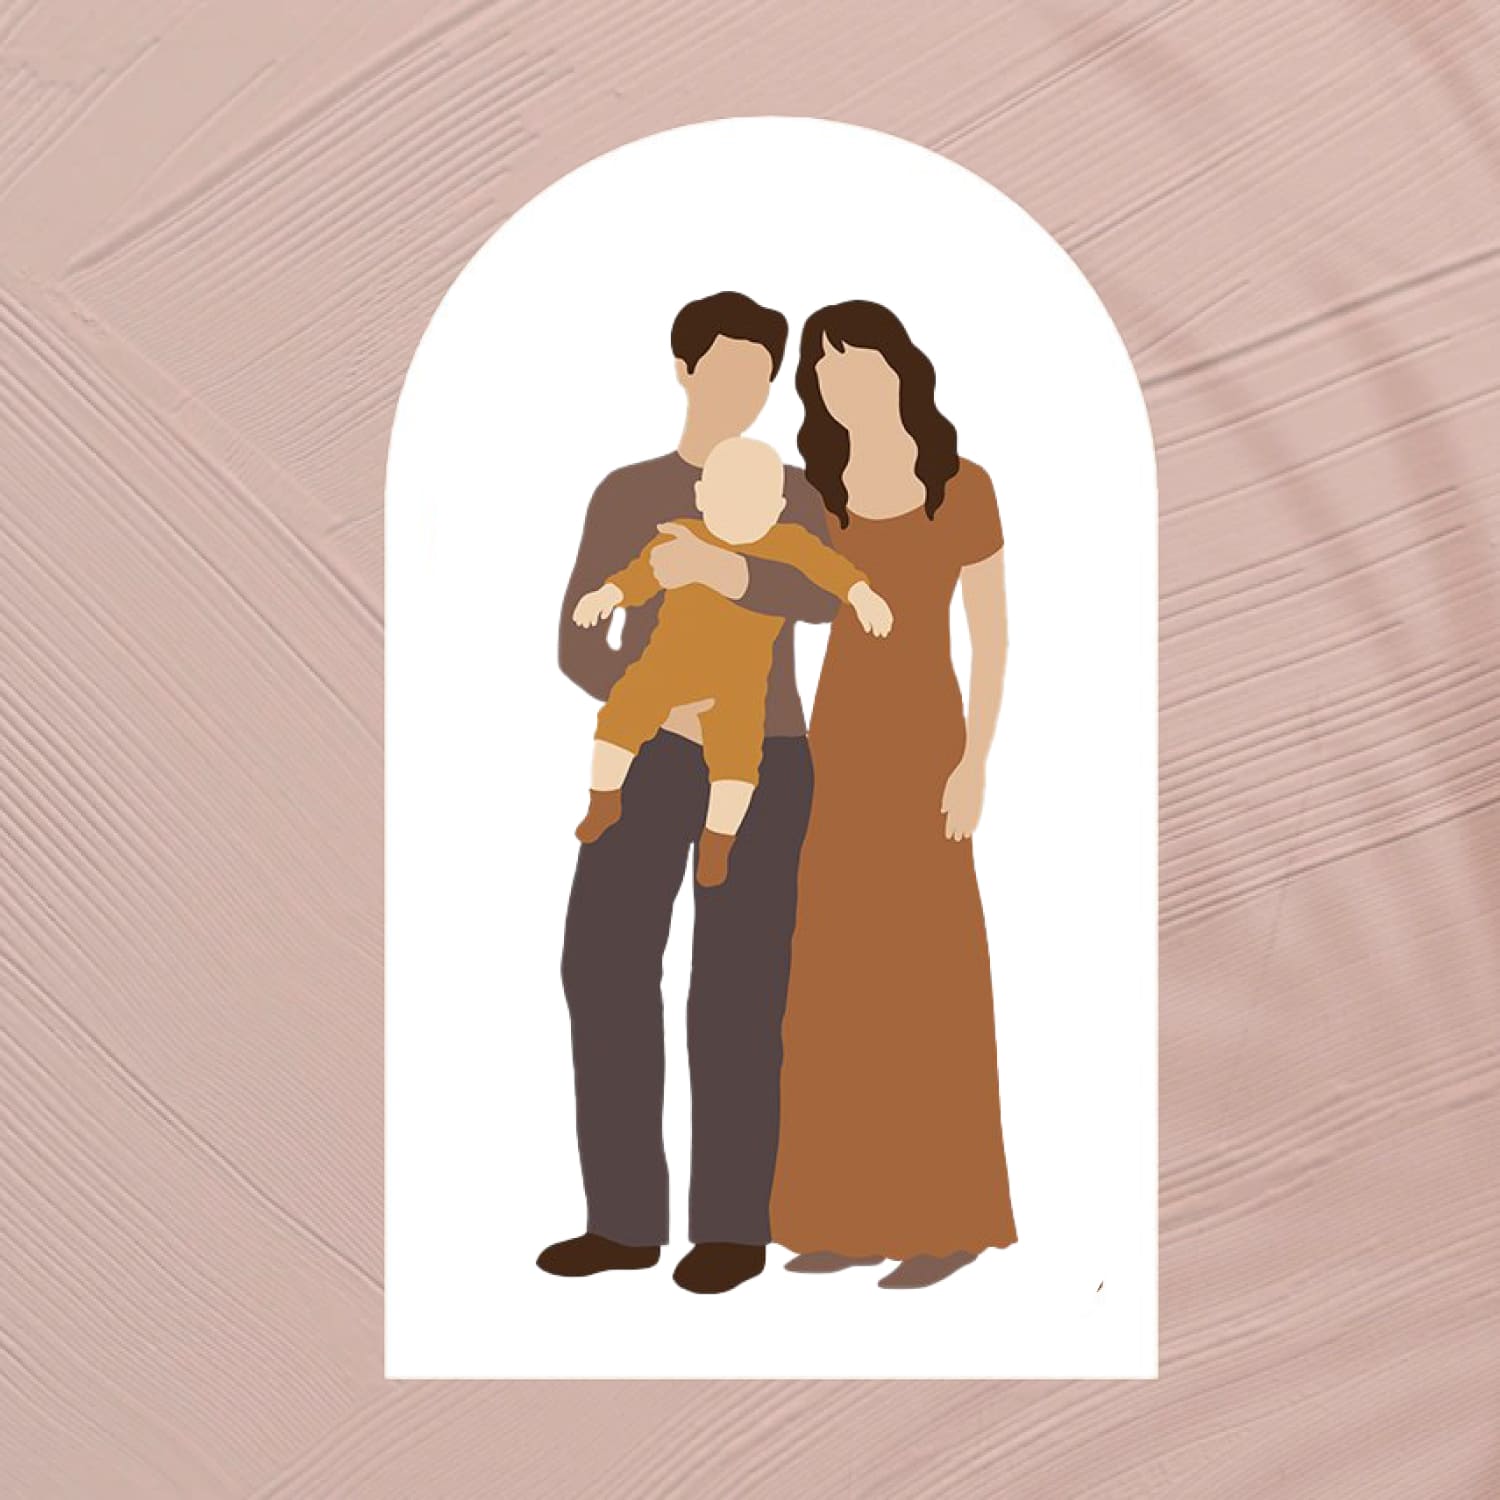 Abstract family portrait SVG clipart, second picture 1500x1500.